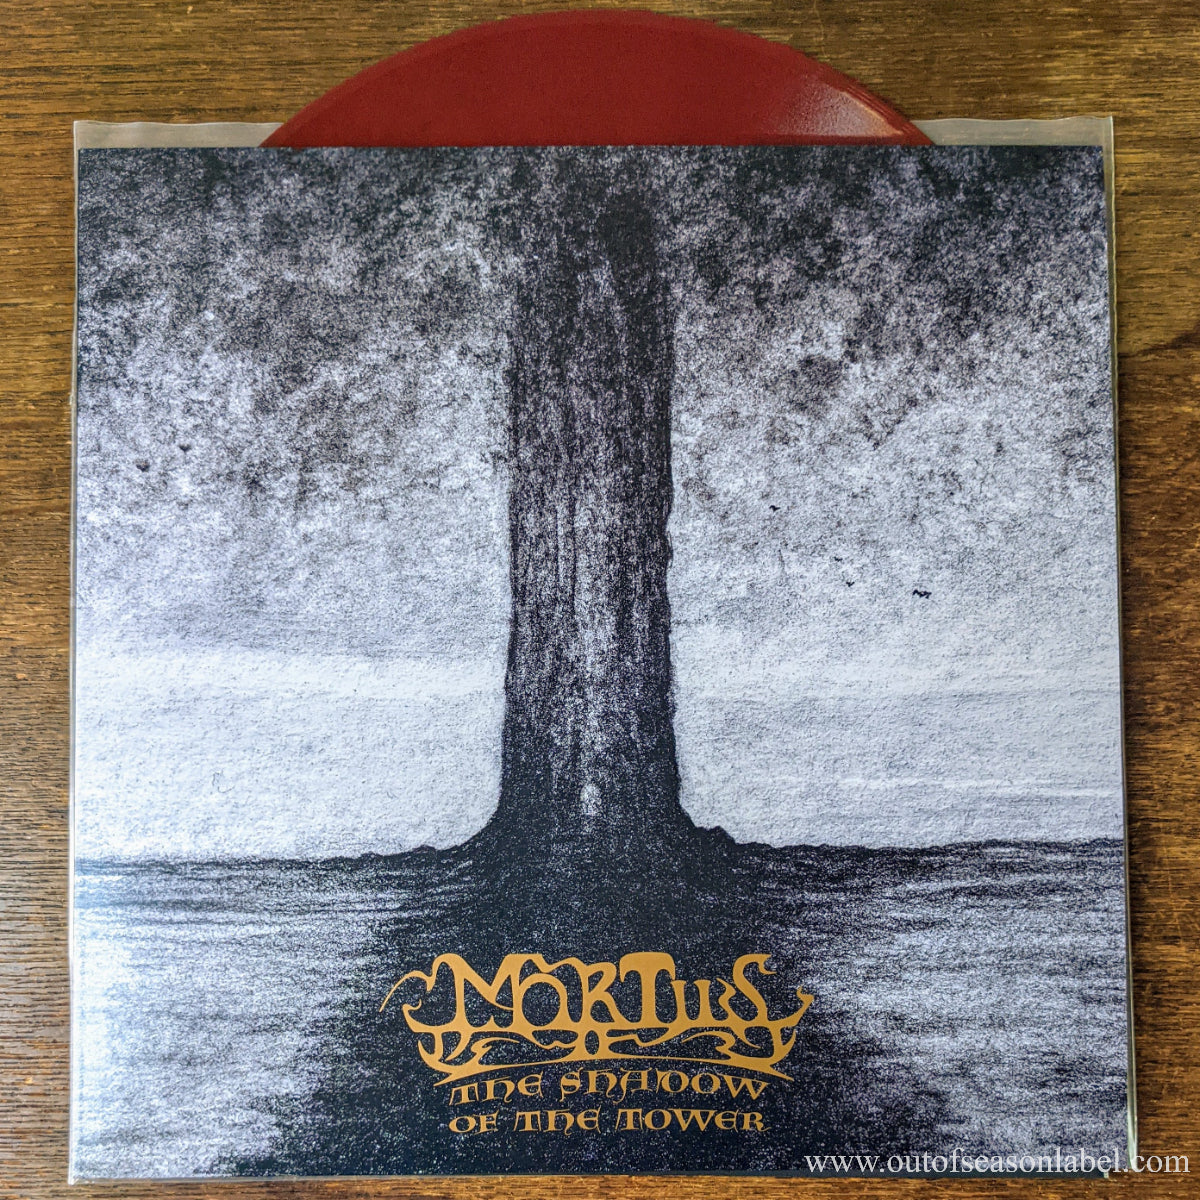 [SOLD OUT] MORTIIS "The Shadow of the Tower" Vinyl LP (Color)